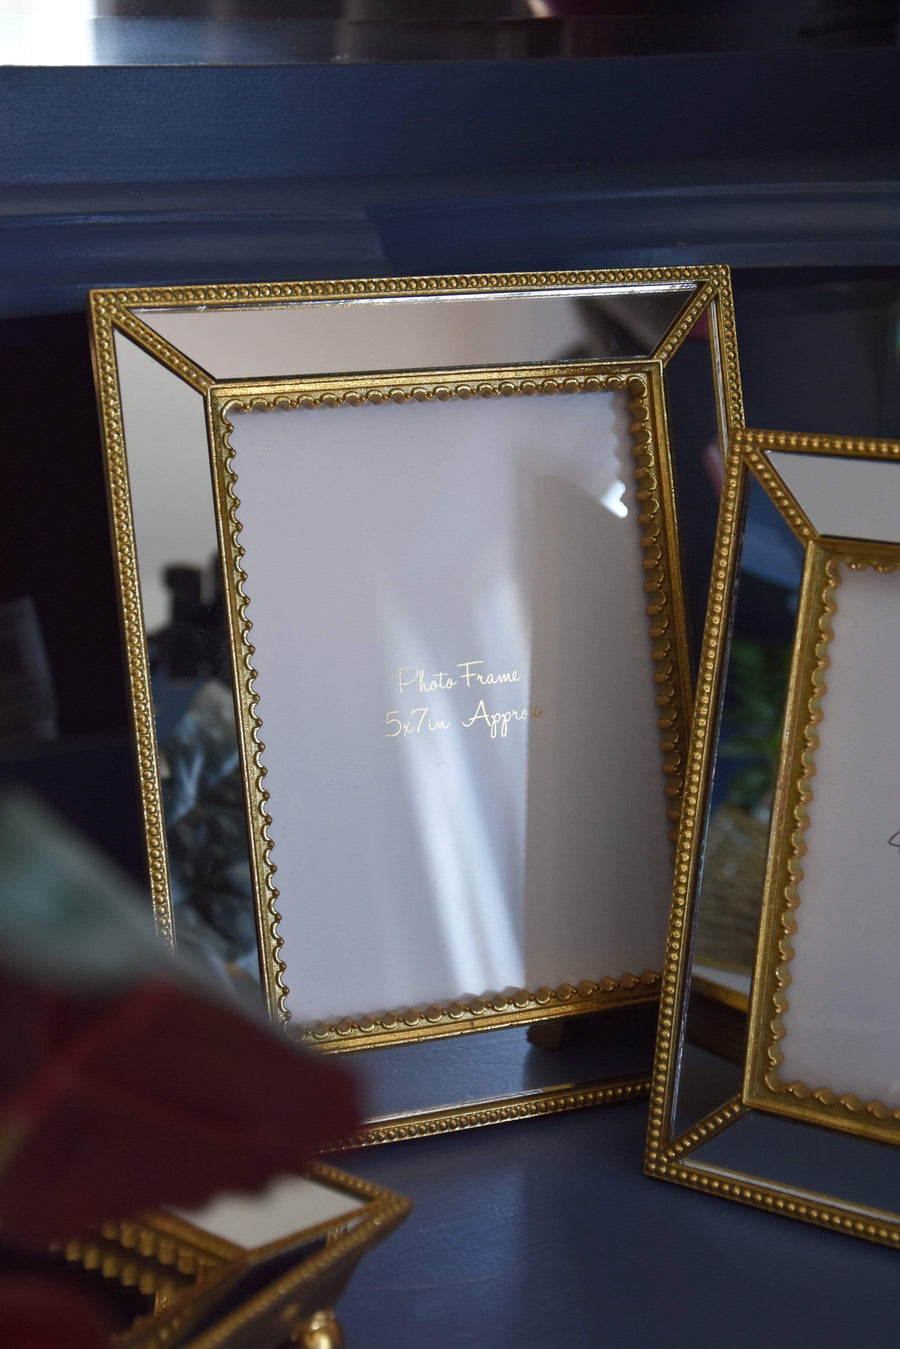 ESME Home Ornate Mirrored and Gold Photo Frame 5x7"